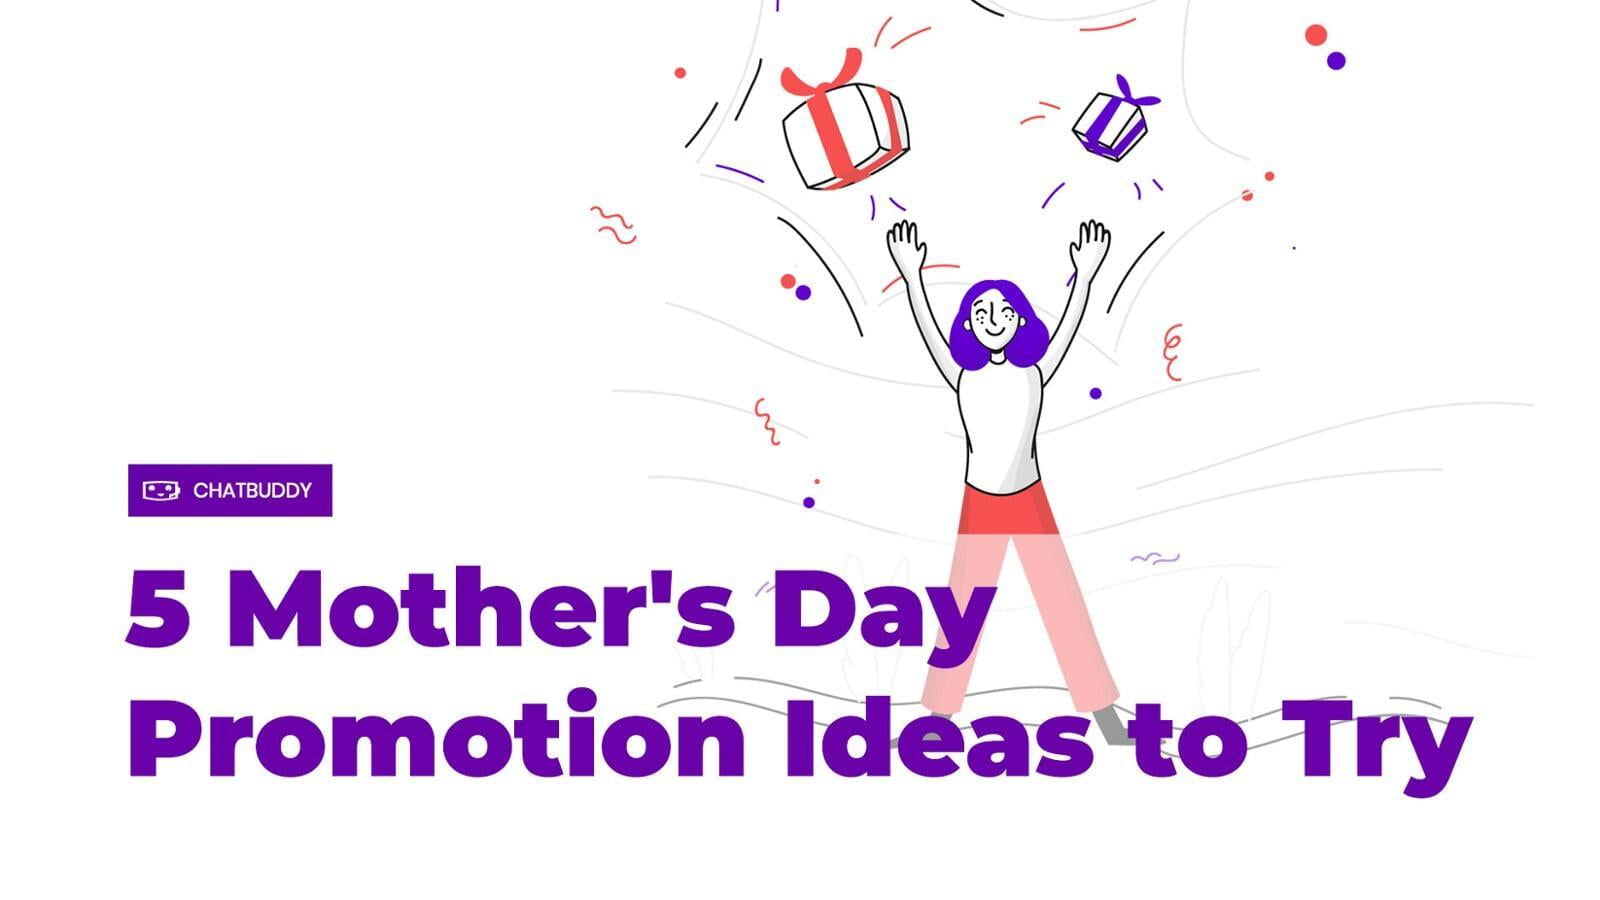 5 Mother's Day Promotion Ideas to Try